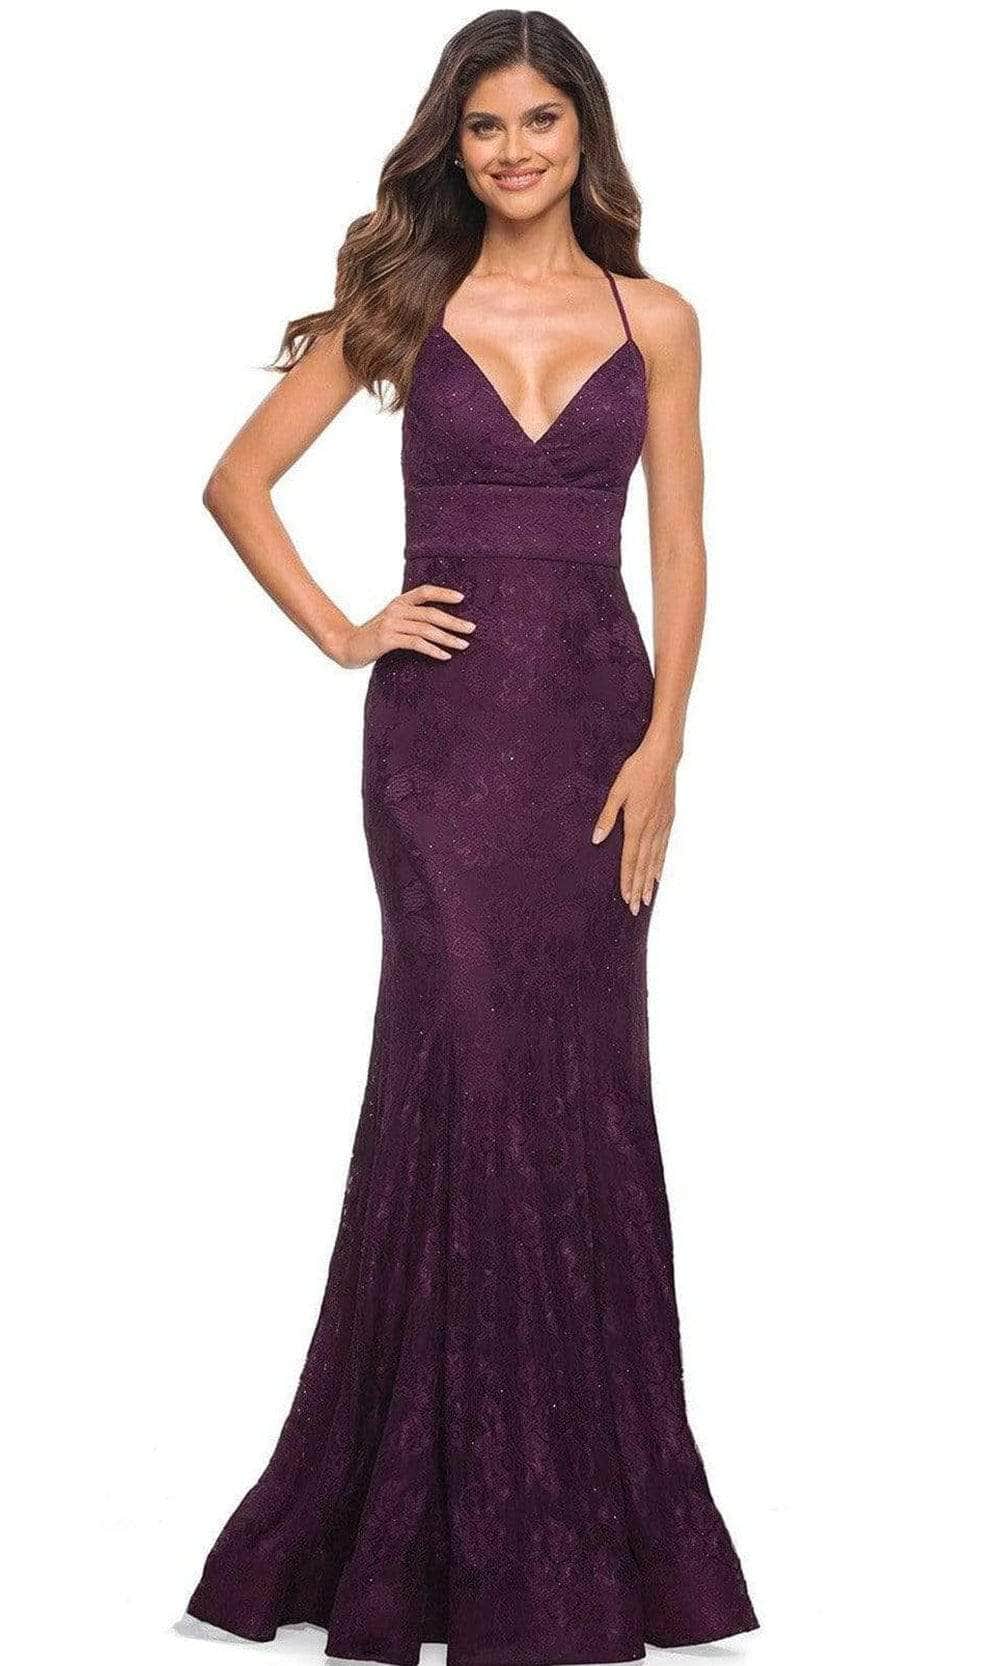 La Femme - Strappy Back Lace Prom Gown 30442SC - 1 pc Dark Berry In Size 4 Available CCSALE 4 / Dark Berry